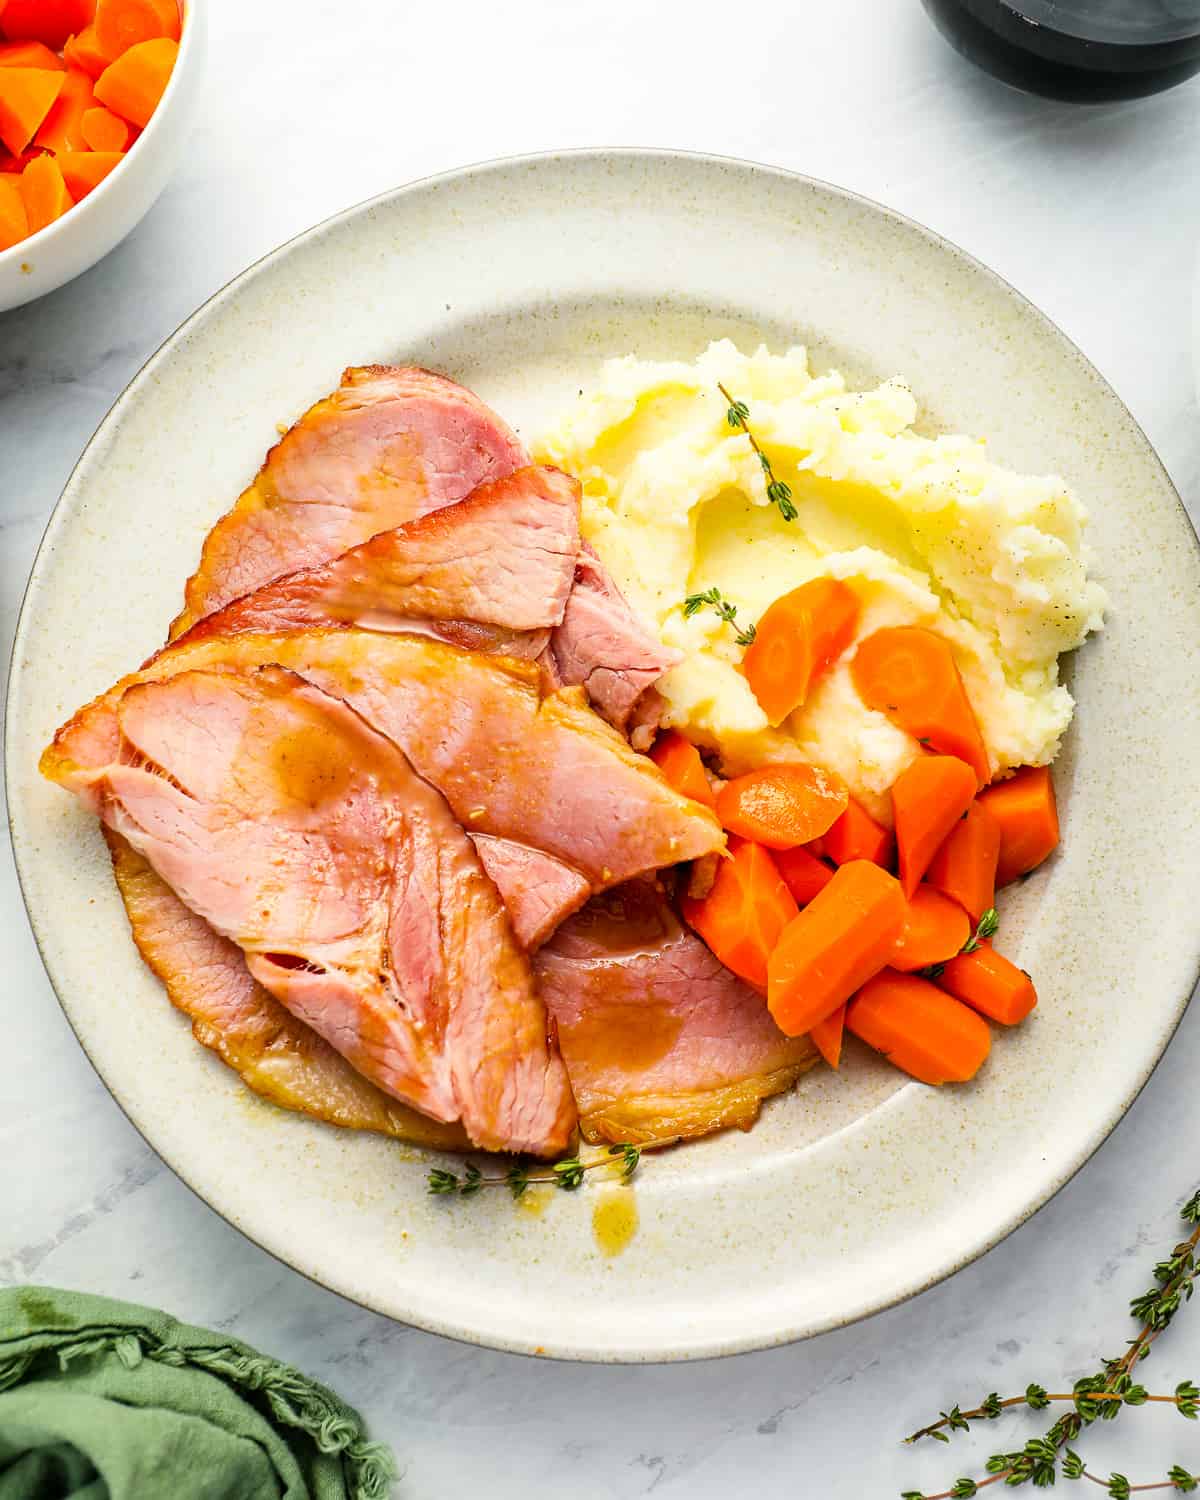 overhead view of a serving of slices of smoked ham on a white plate with mashed potatoes and carrots.